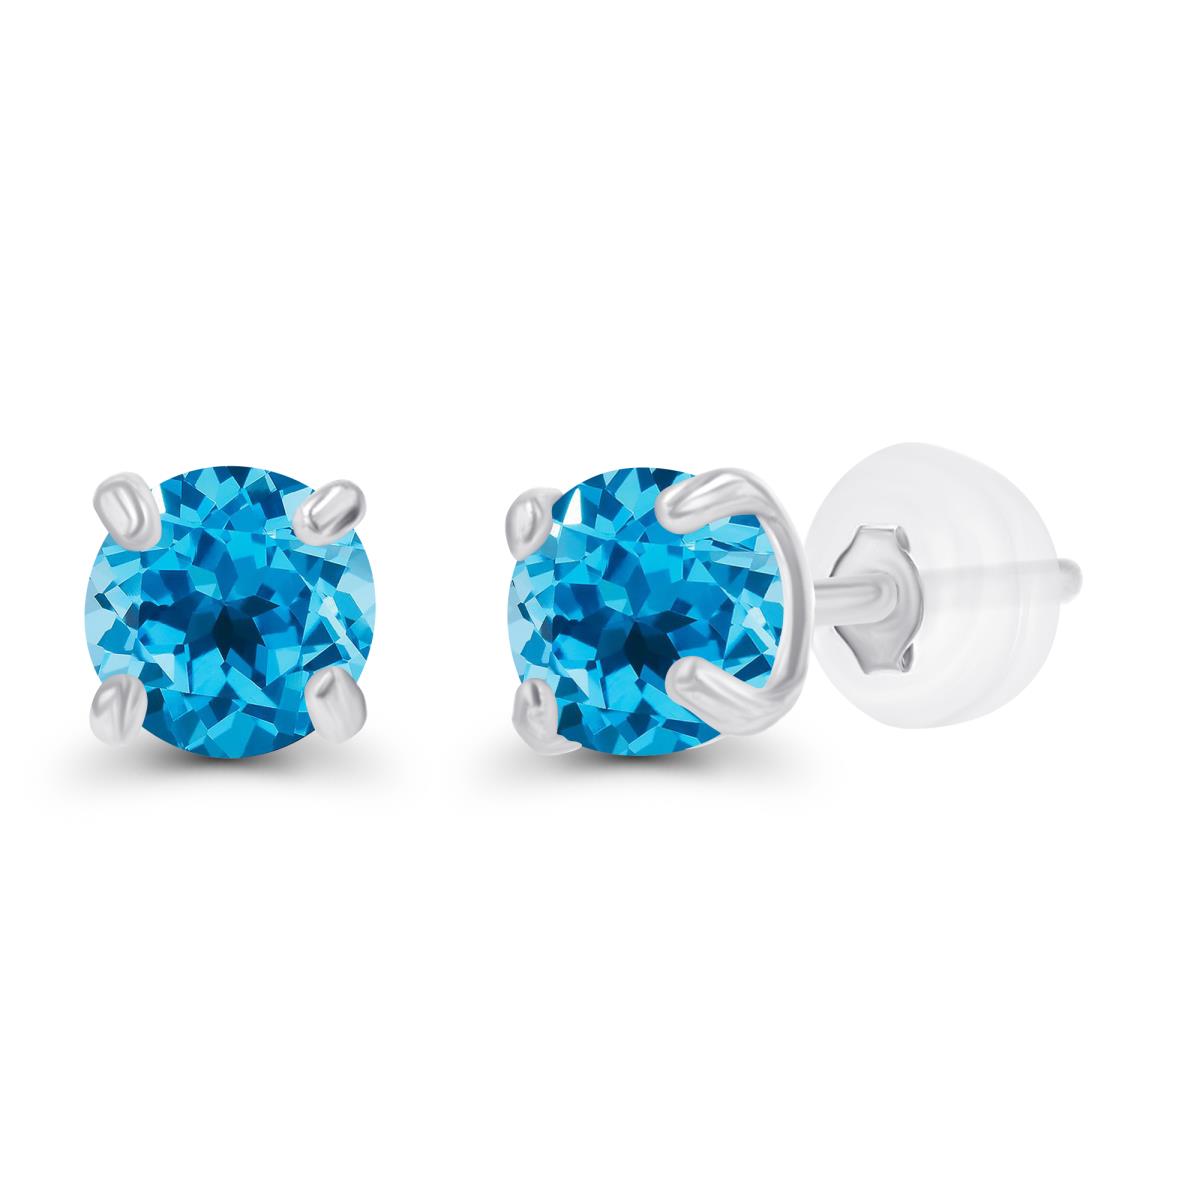 10K White Gold 3mm Round Swiss Blue Topaz Stud Earring with Silicone Back